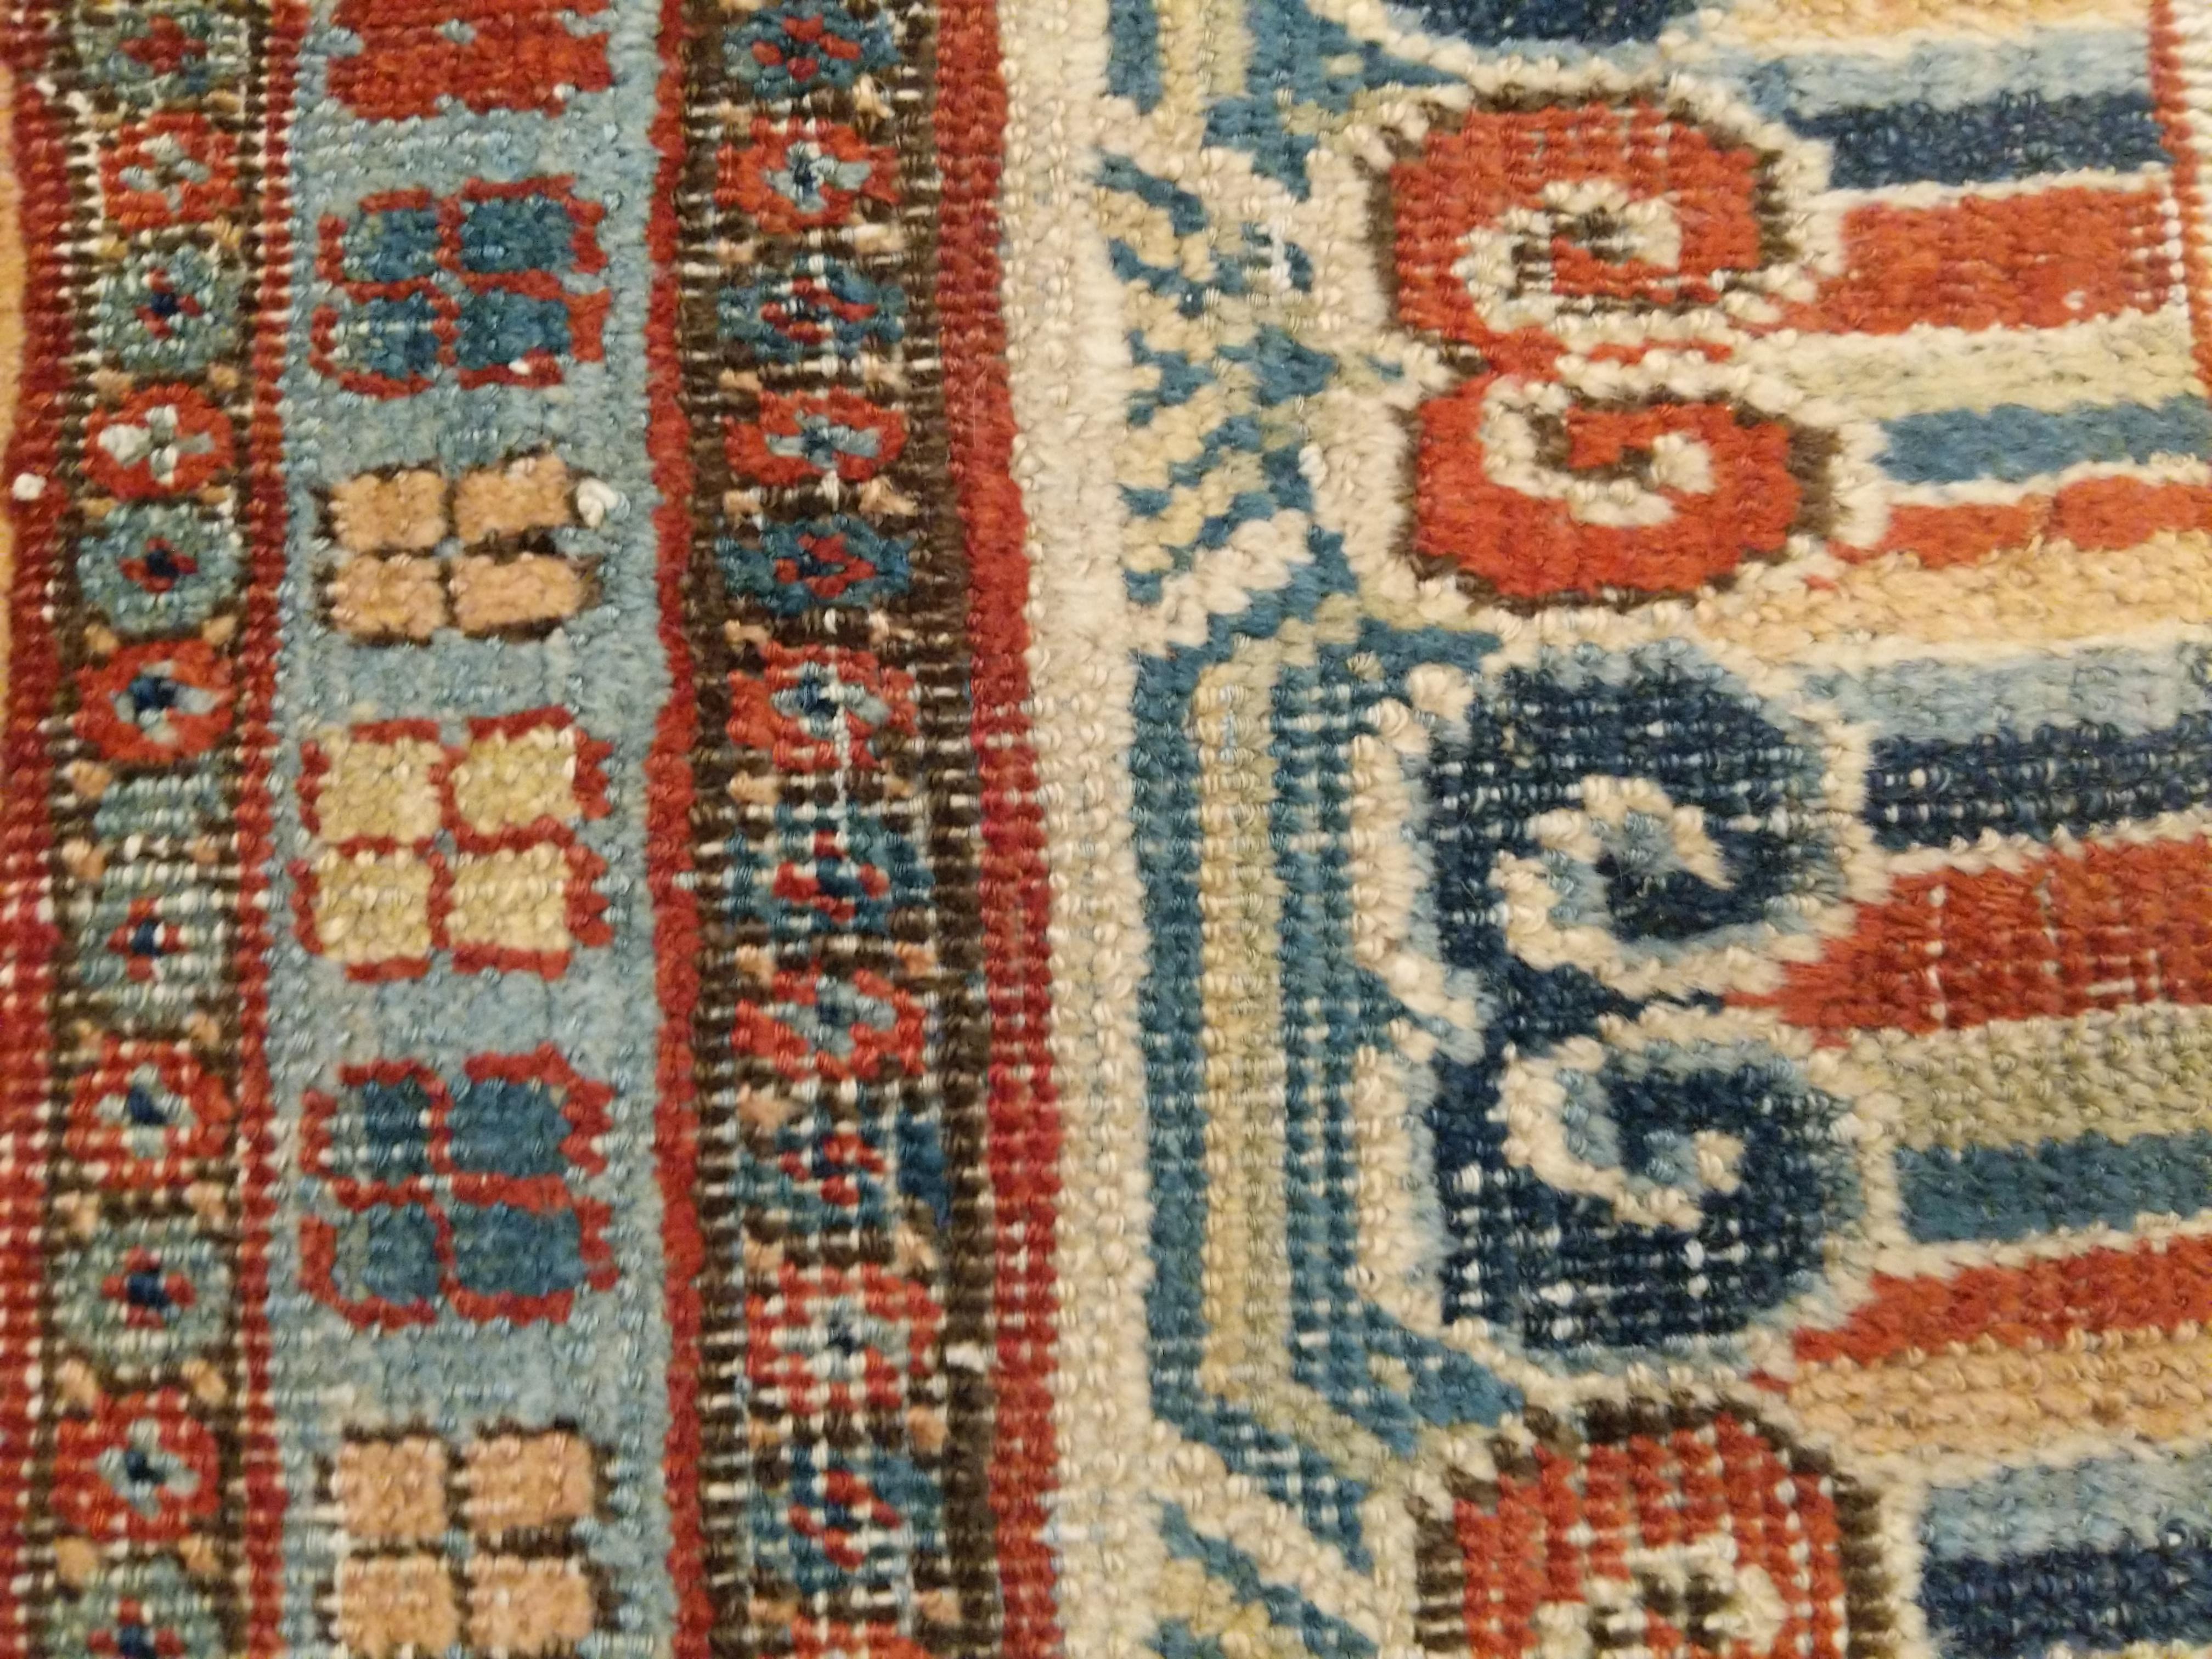 19th Century Rare and Early Khotan Rug with Two Niches For Sale